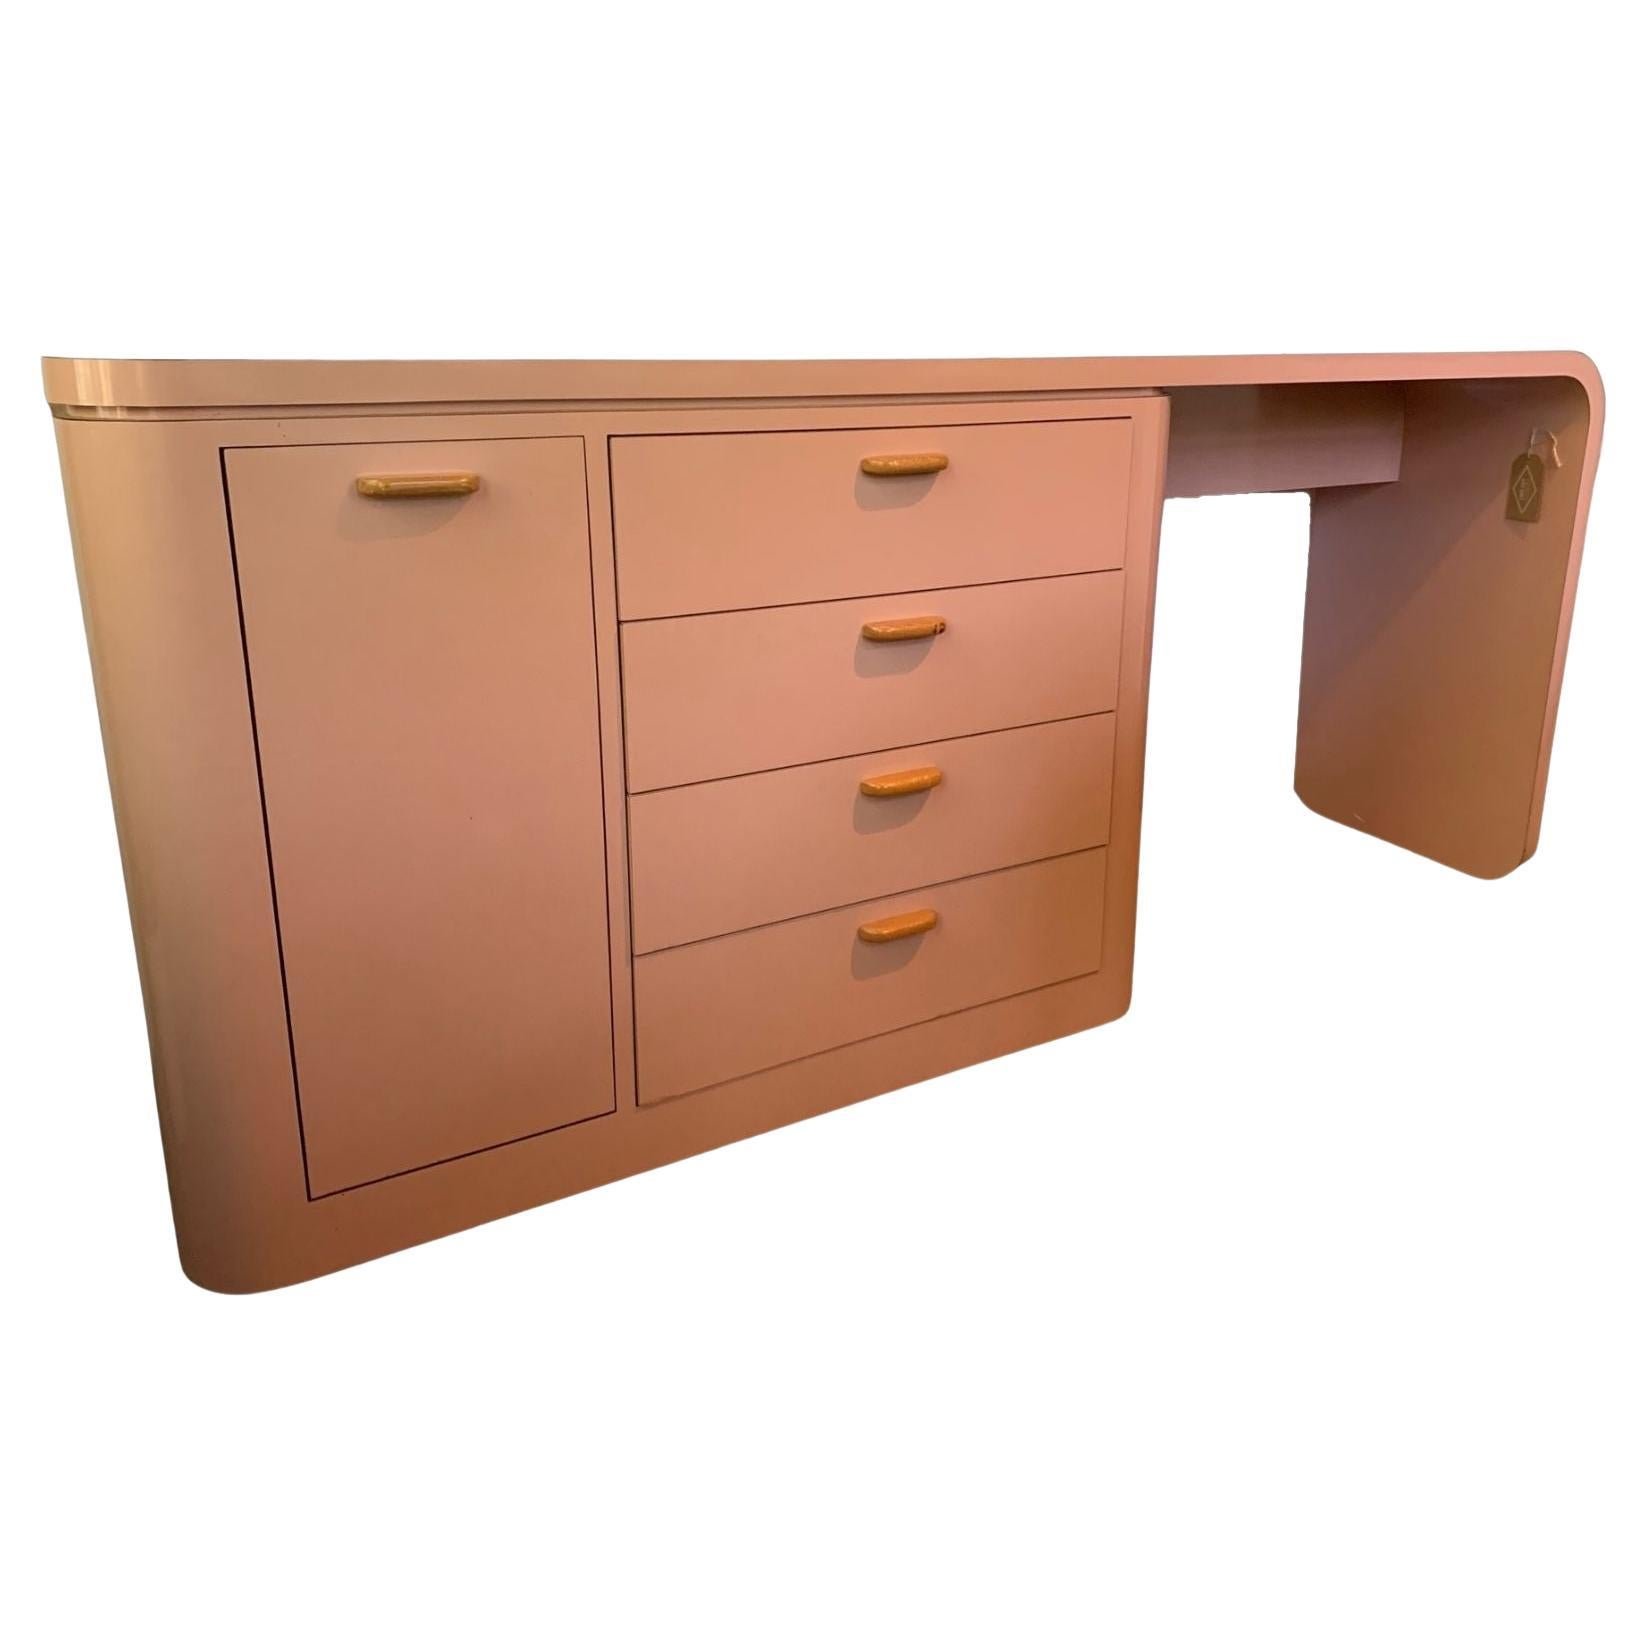 This sleek of vintage desk would be a funky addition to a living room, den, or office. Crafted in the United States circa 1960 and covered in a light pink laminate, the desk is designed for a left-handed user, with the drawers situated on the left